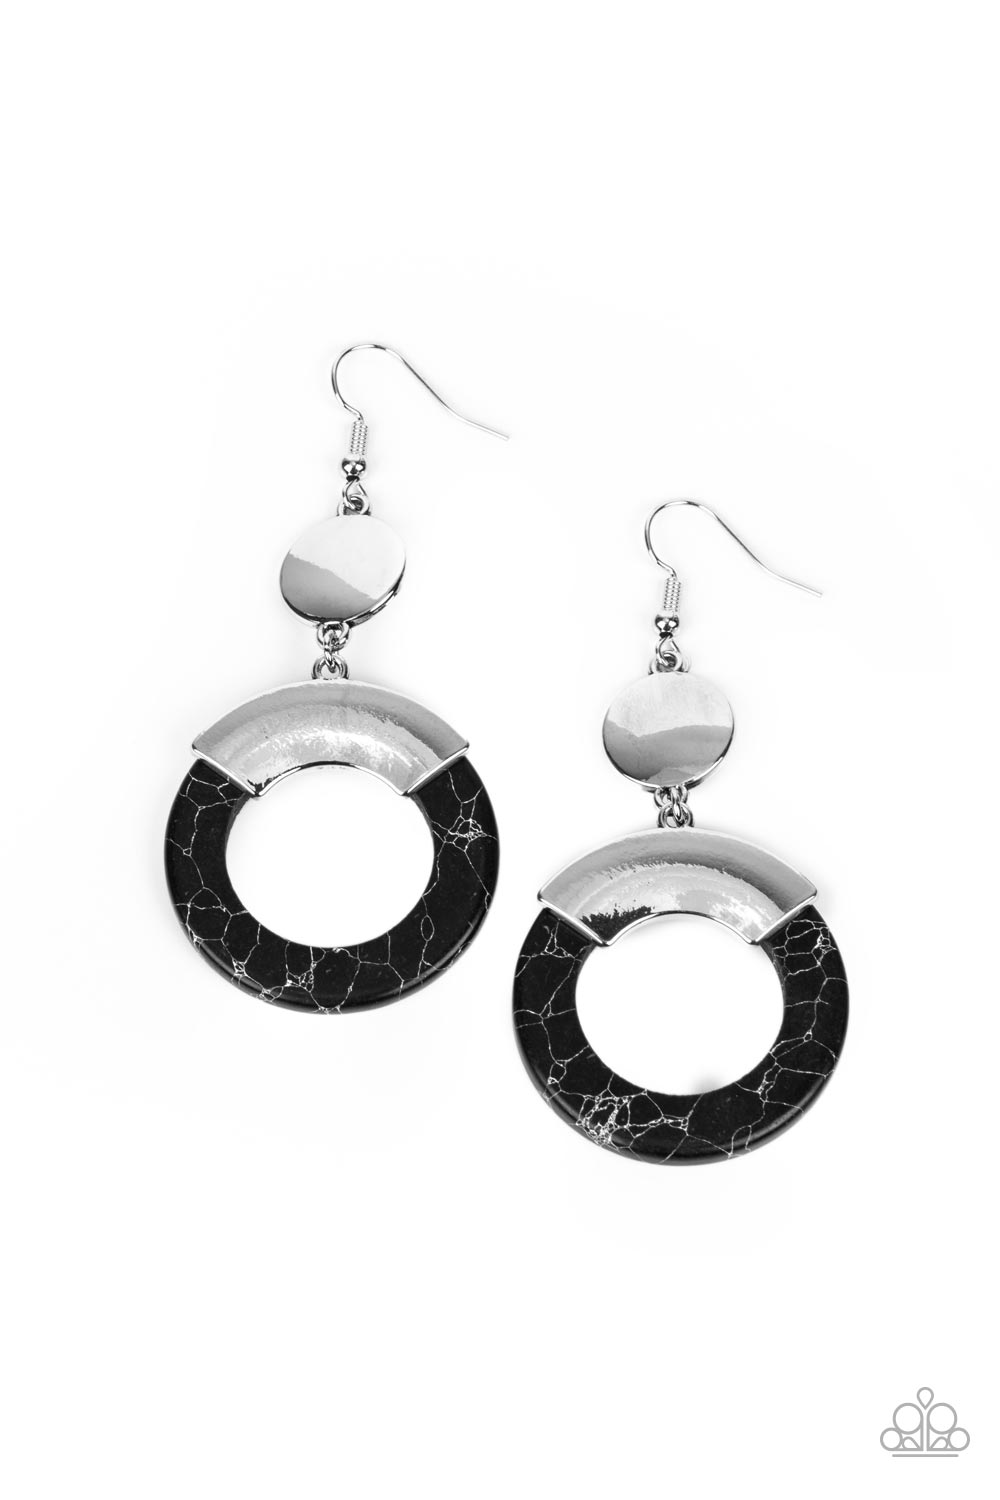 ENTRADA at Your Own Risk - Black (Stone Hoop) Earring